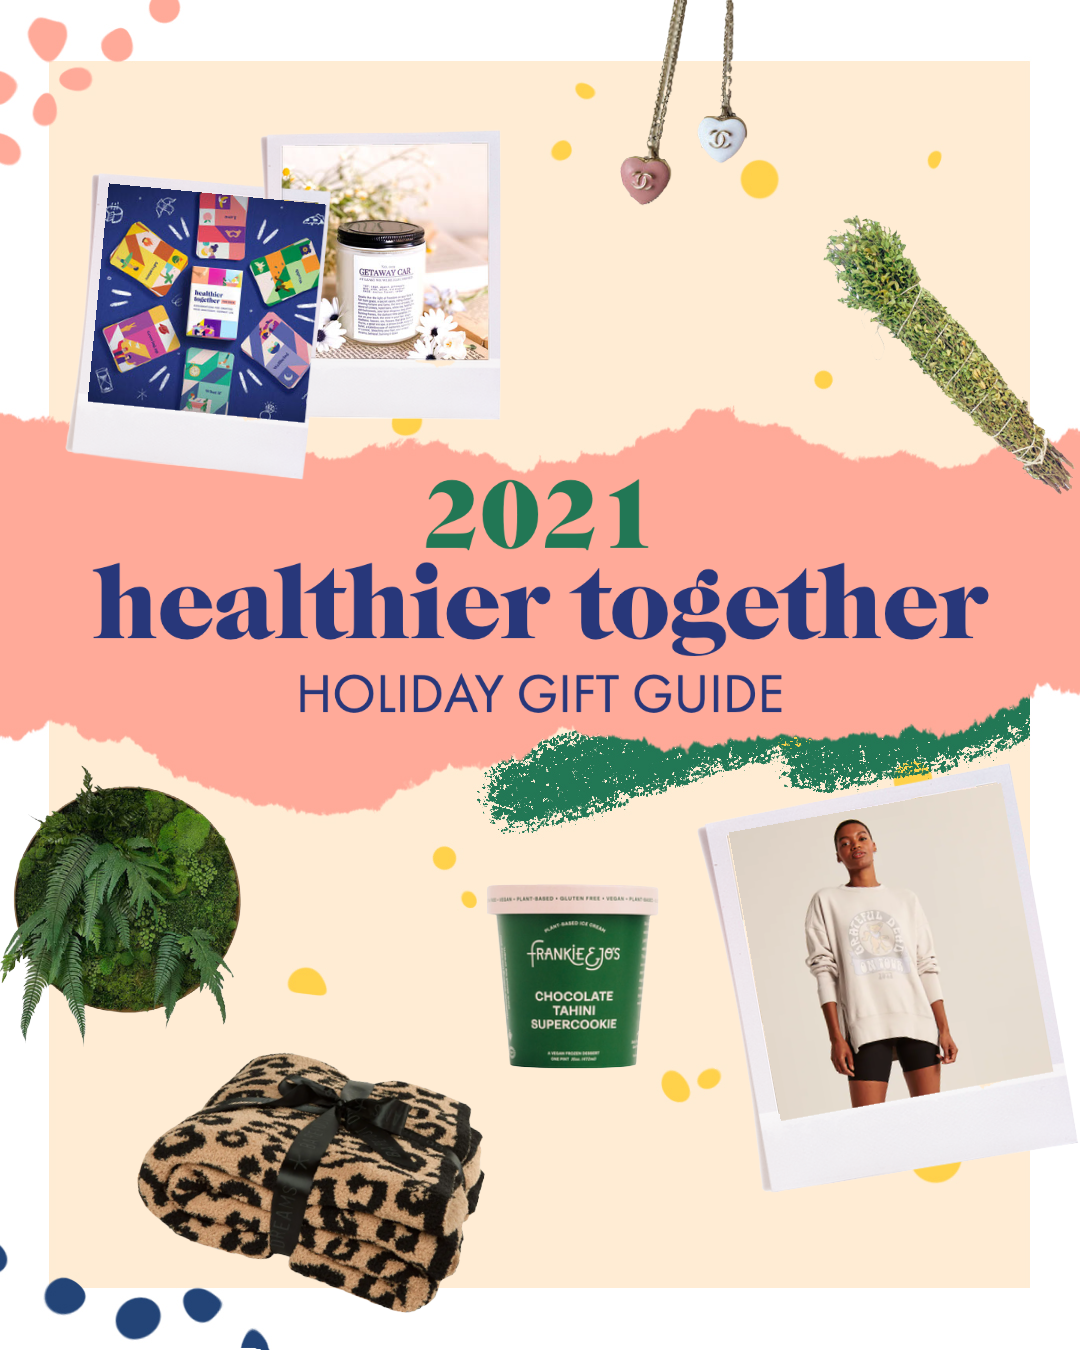 2021 Healthy Holiday Gift Guide